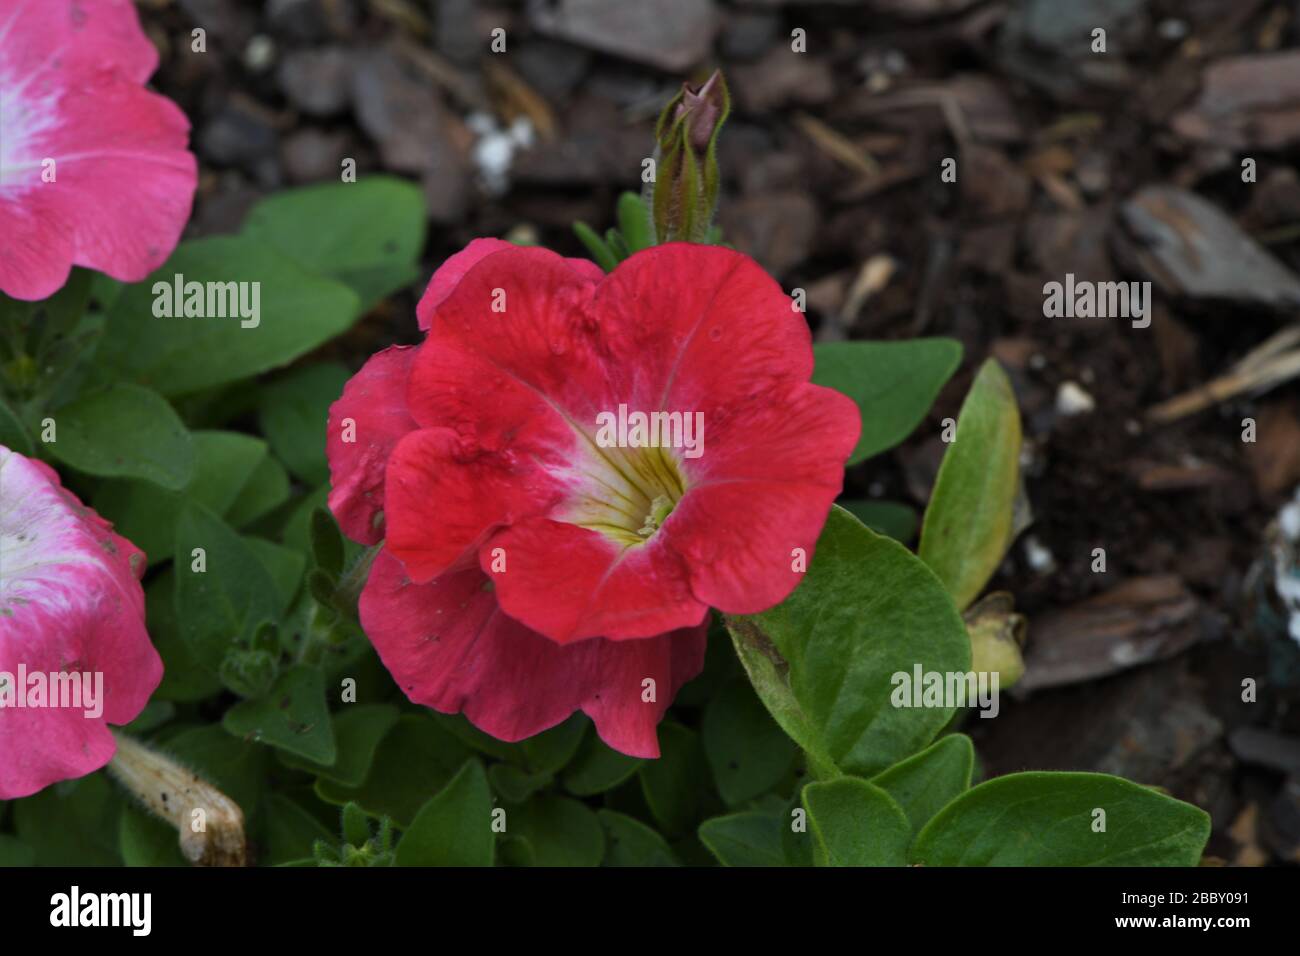 Red pansy. Stock Photo